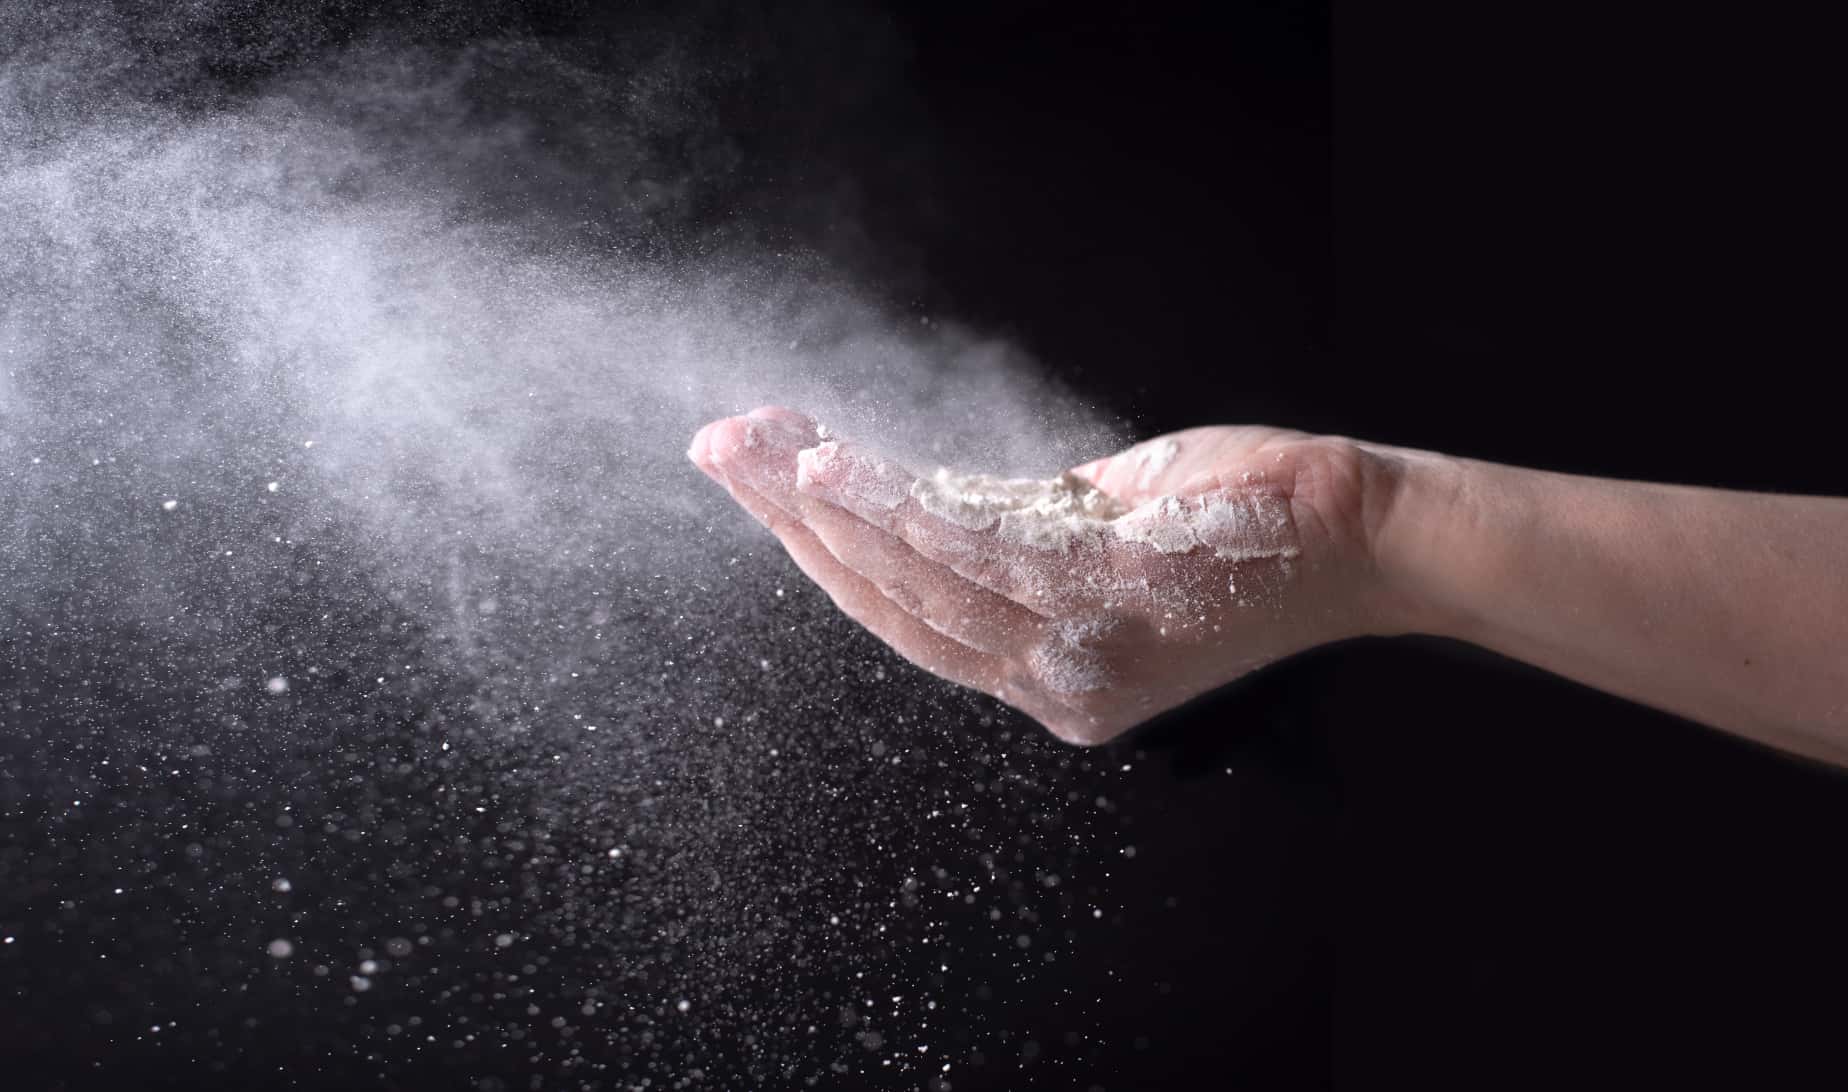 Detail of a hand with flour